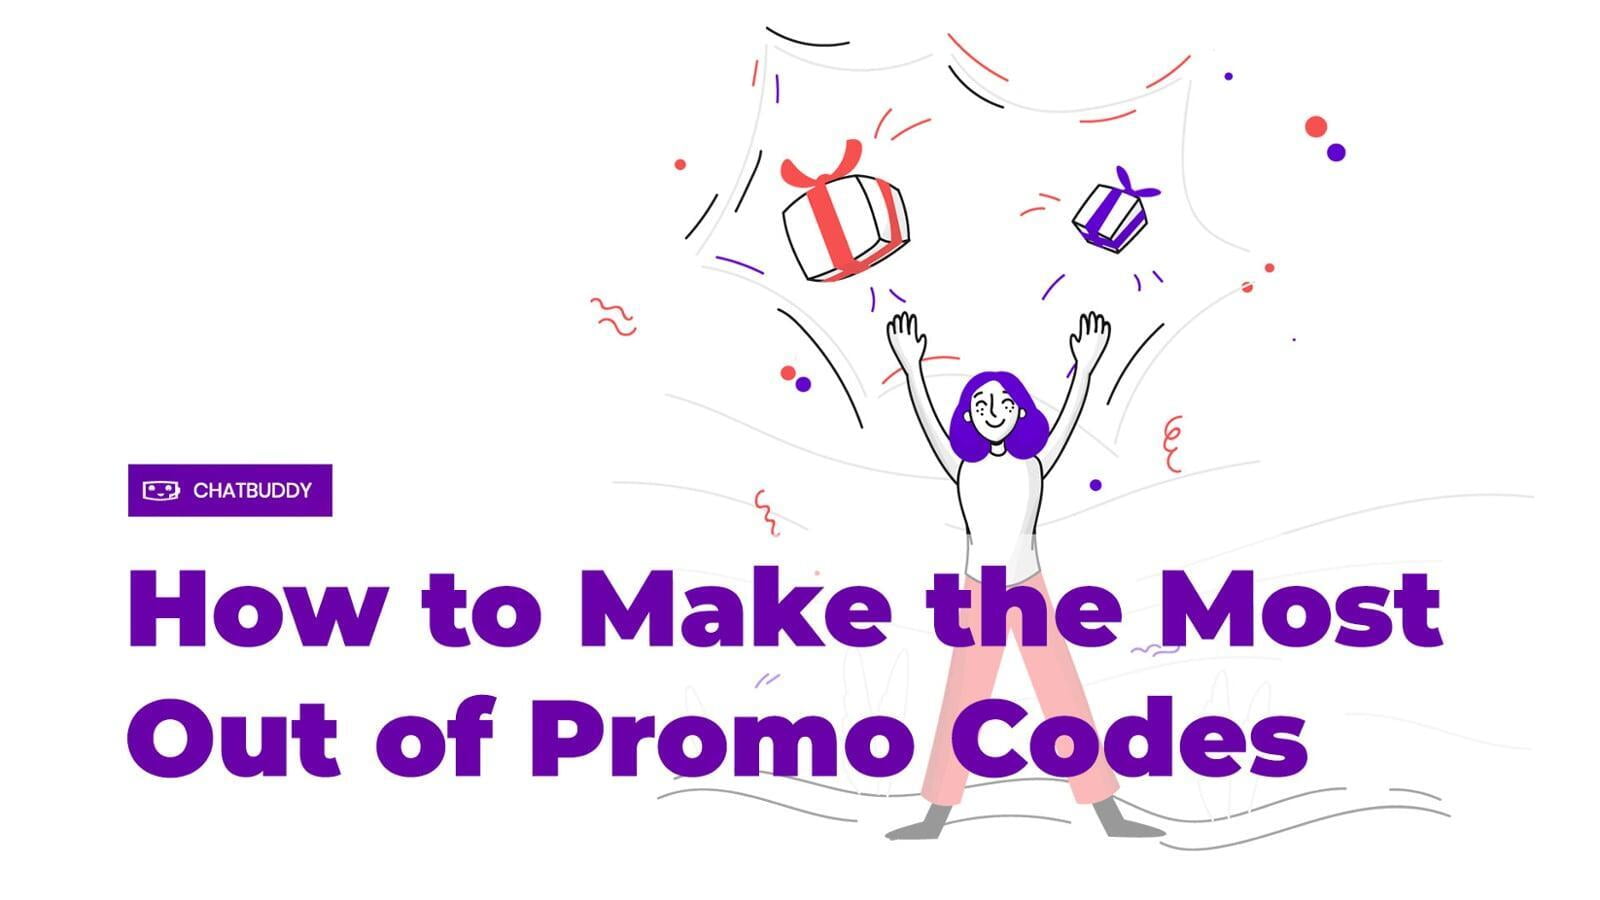 How to Make the Most Out of Promo Codes